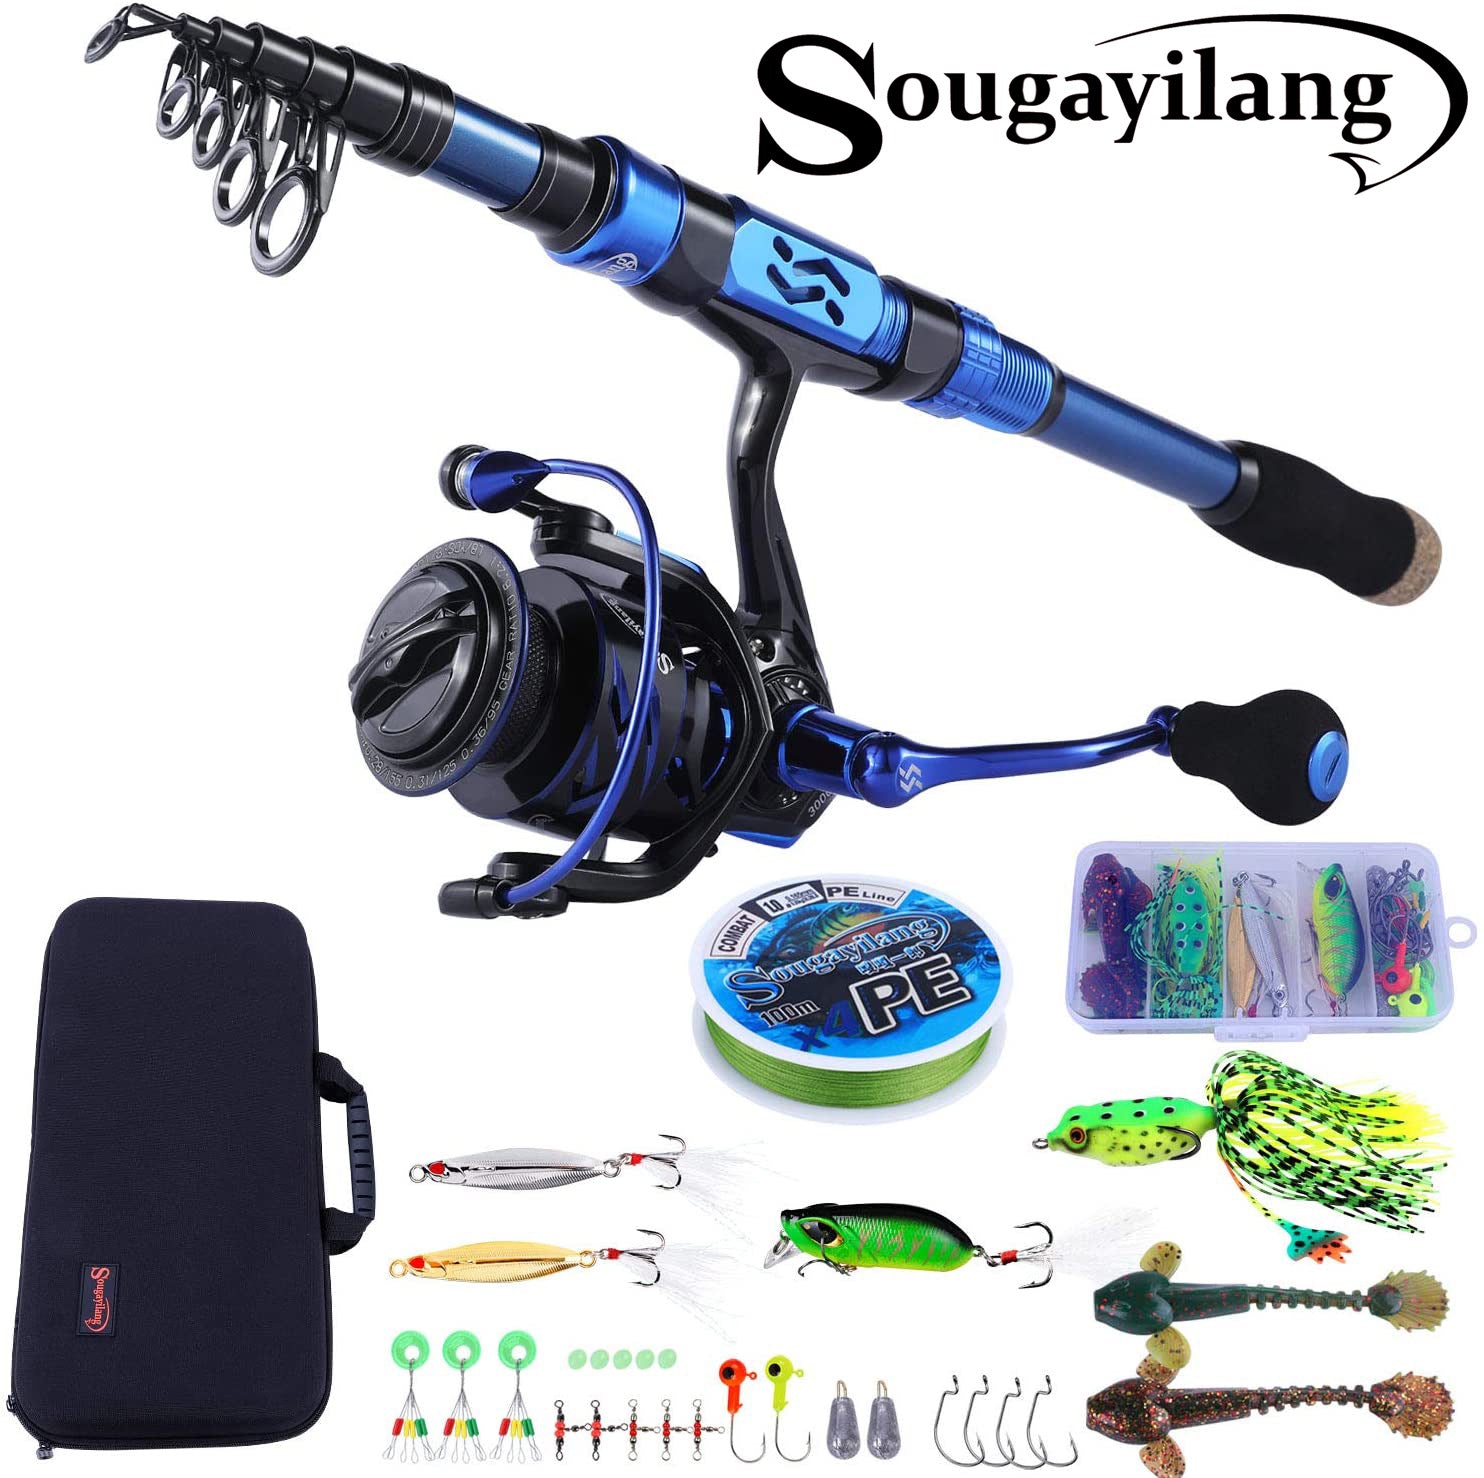 Fishing Rod Reel Combos, Stainless Steel Portable Collapsible Telescopic  Fishing Pole with Spinning Reel Kit Fishing Rod and Its Accessories Fishing